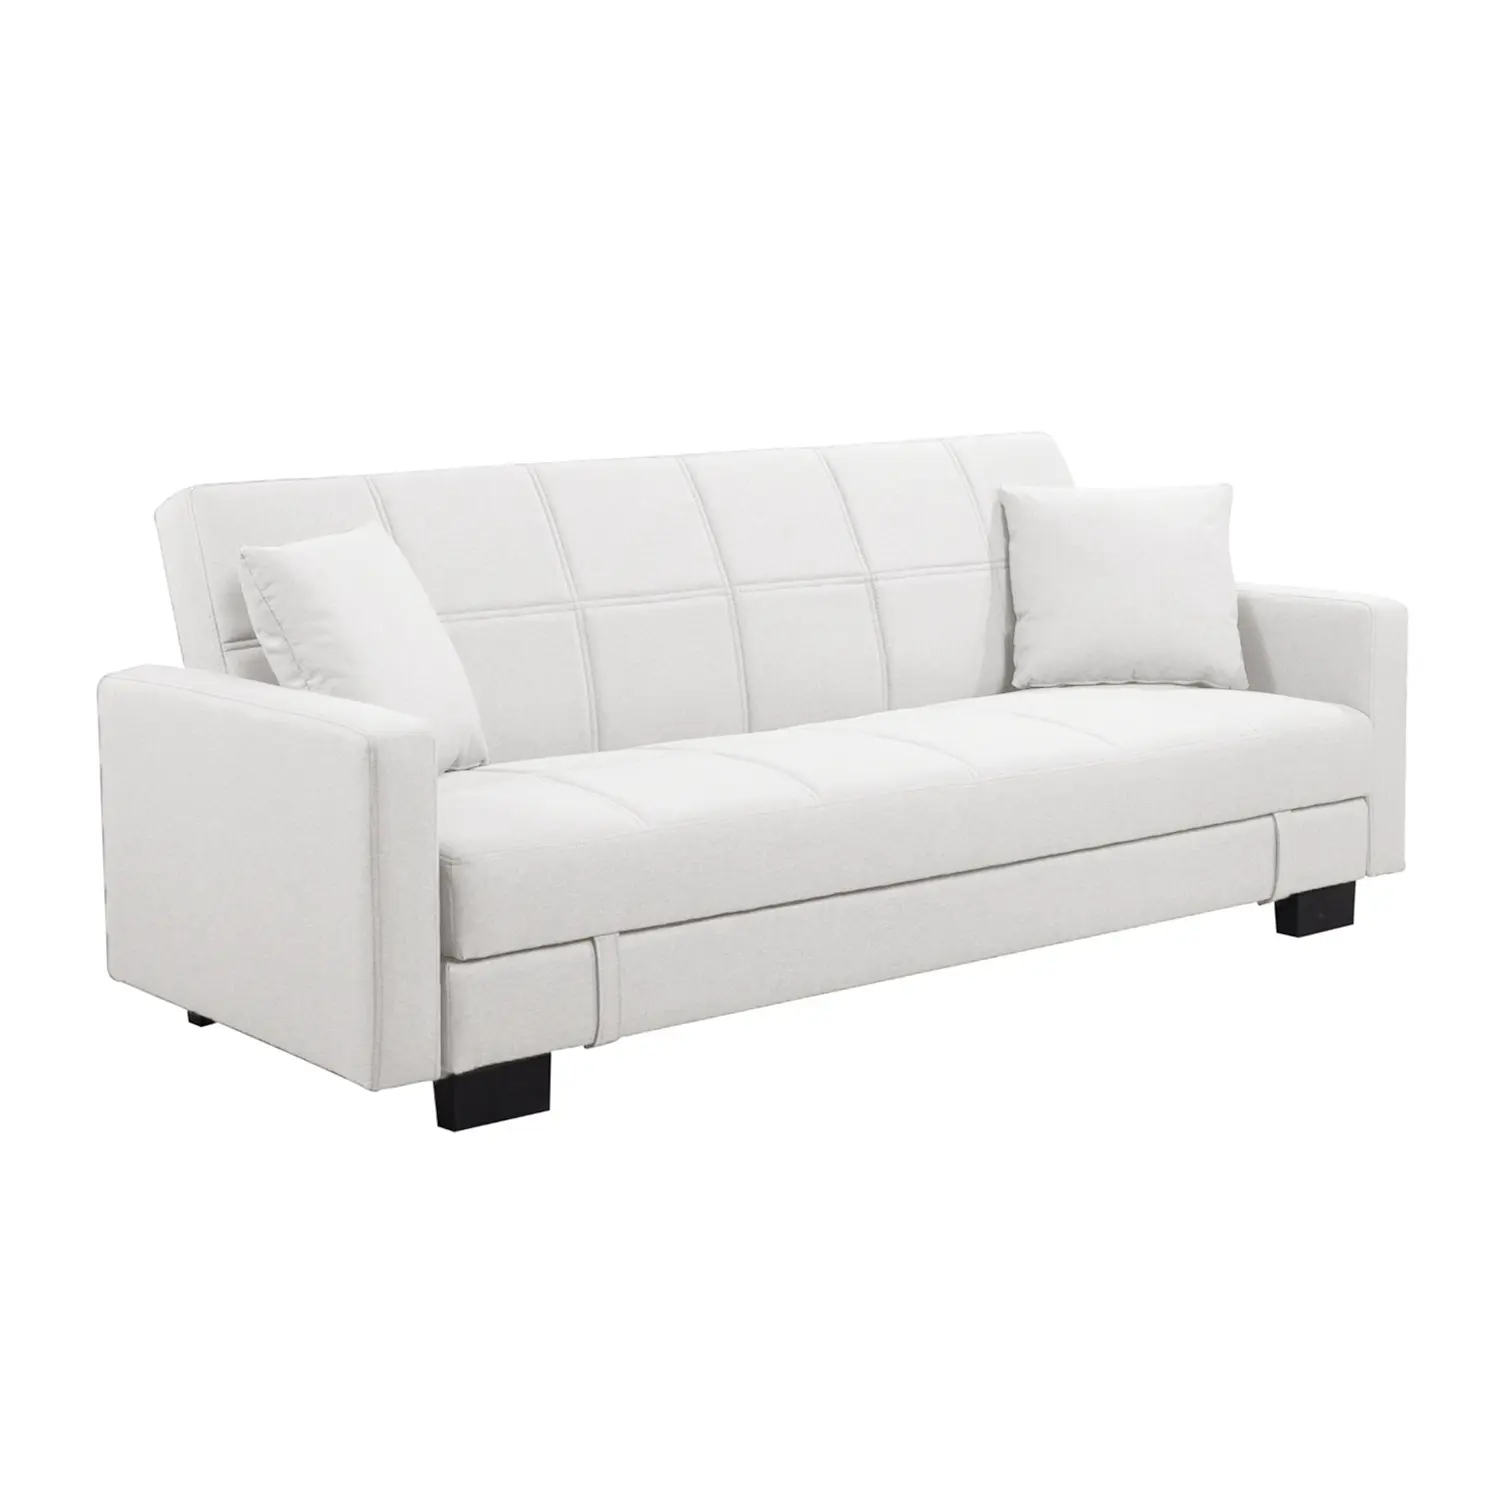 Furniture Source Philippines, White Leather Bed Sofa